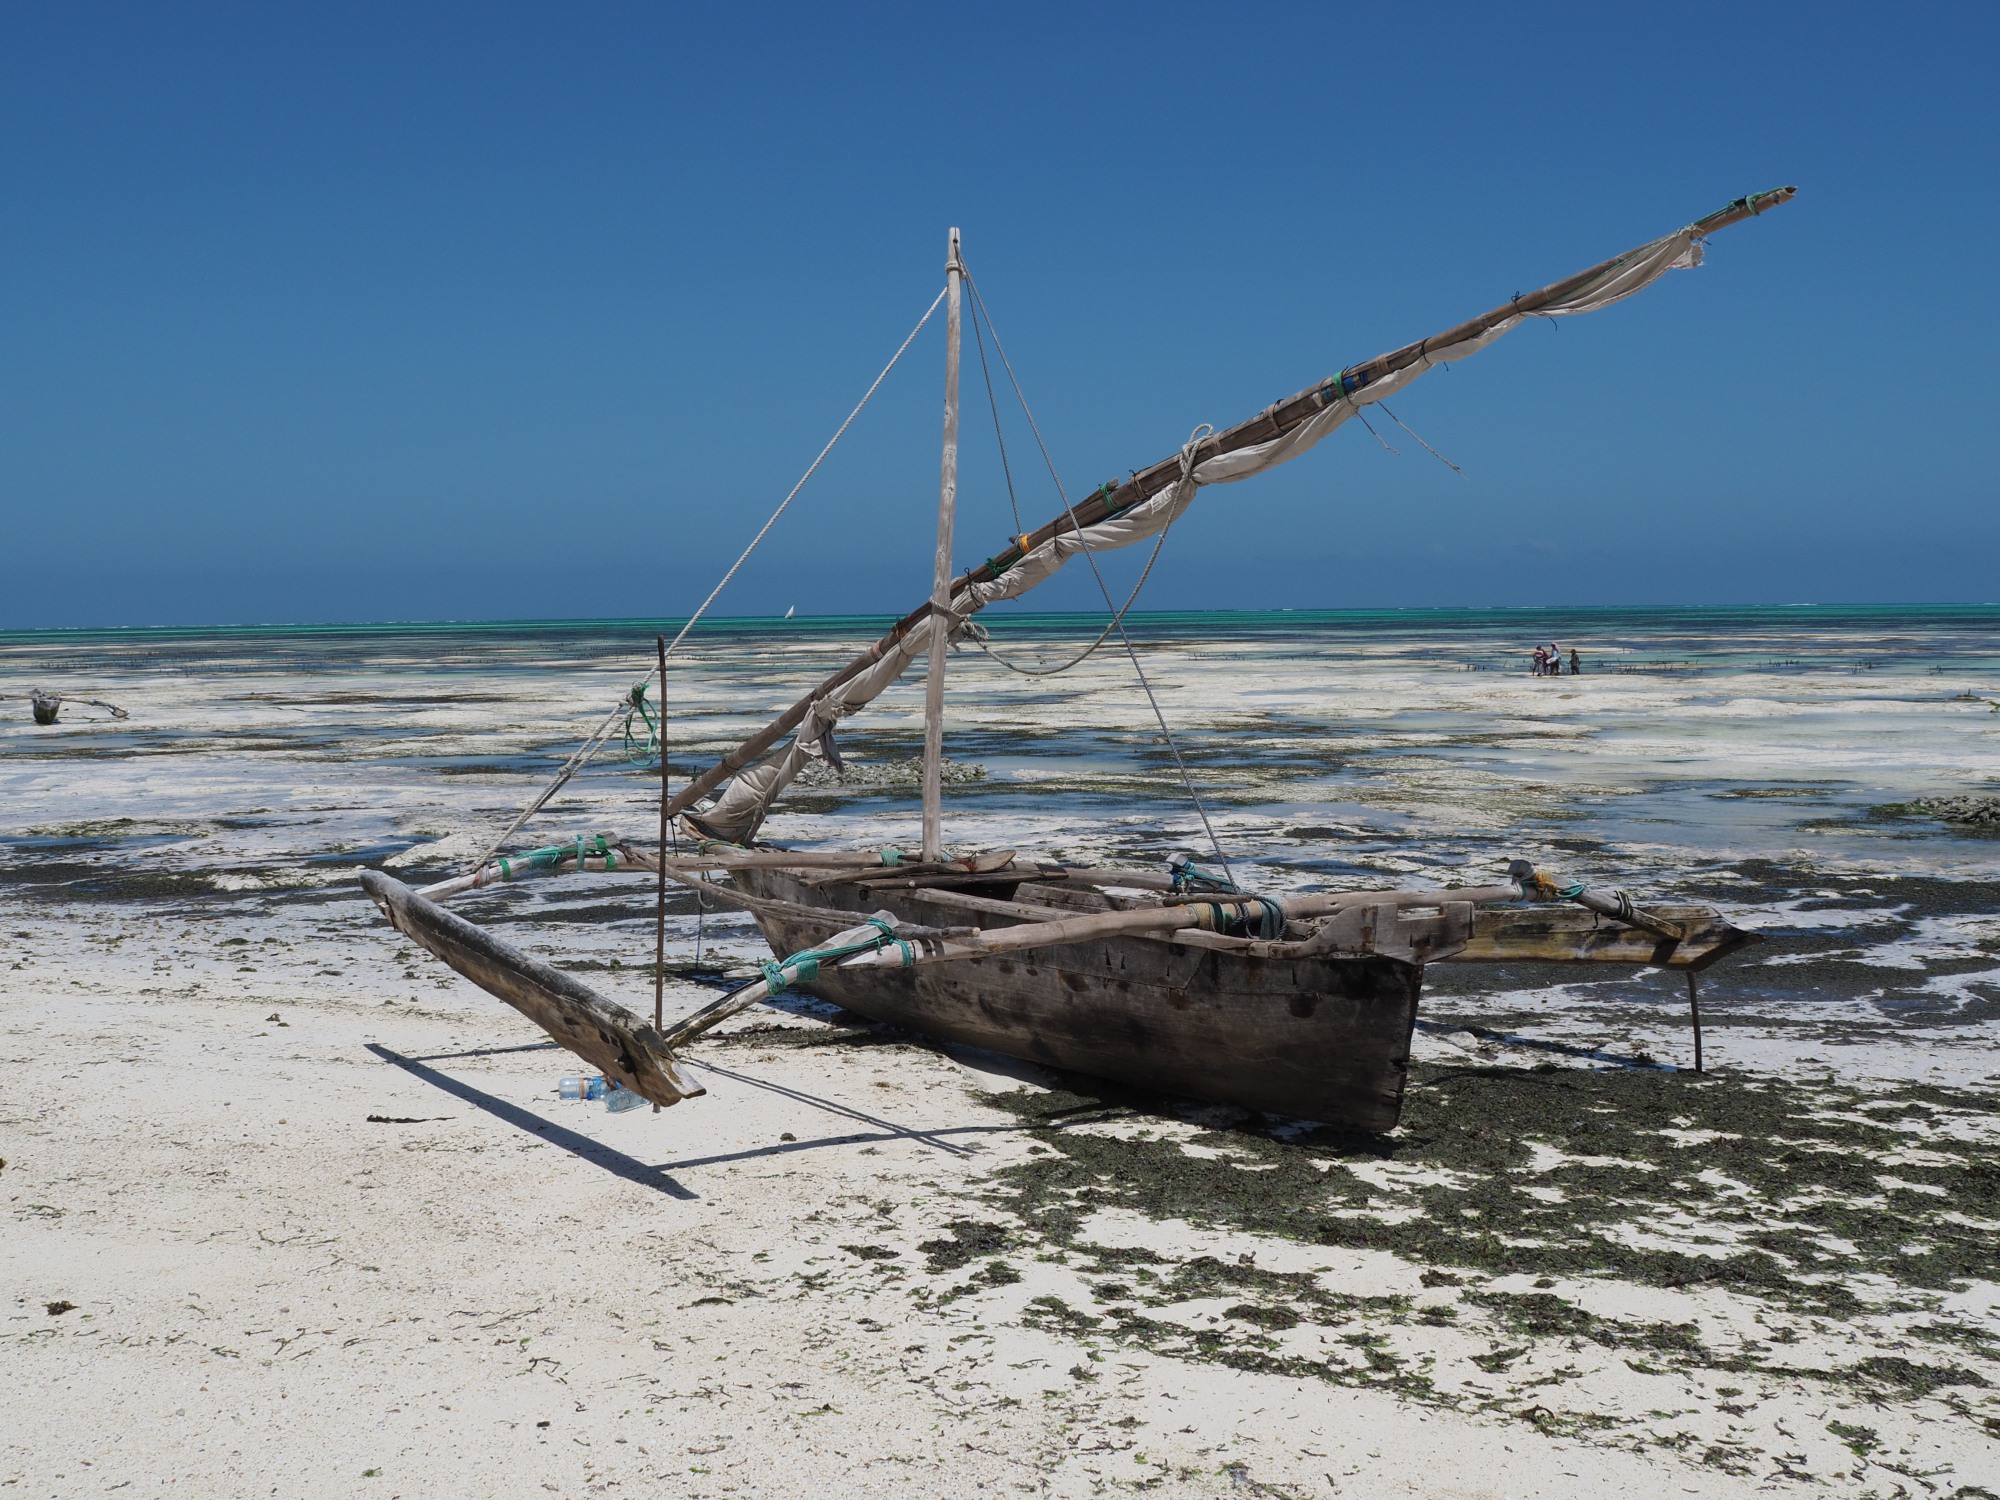 One of many Dhows at low tide